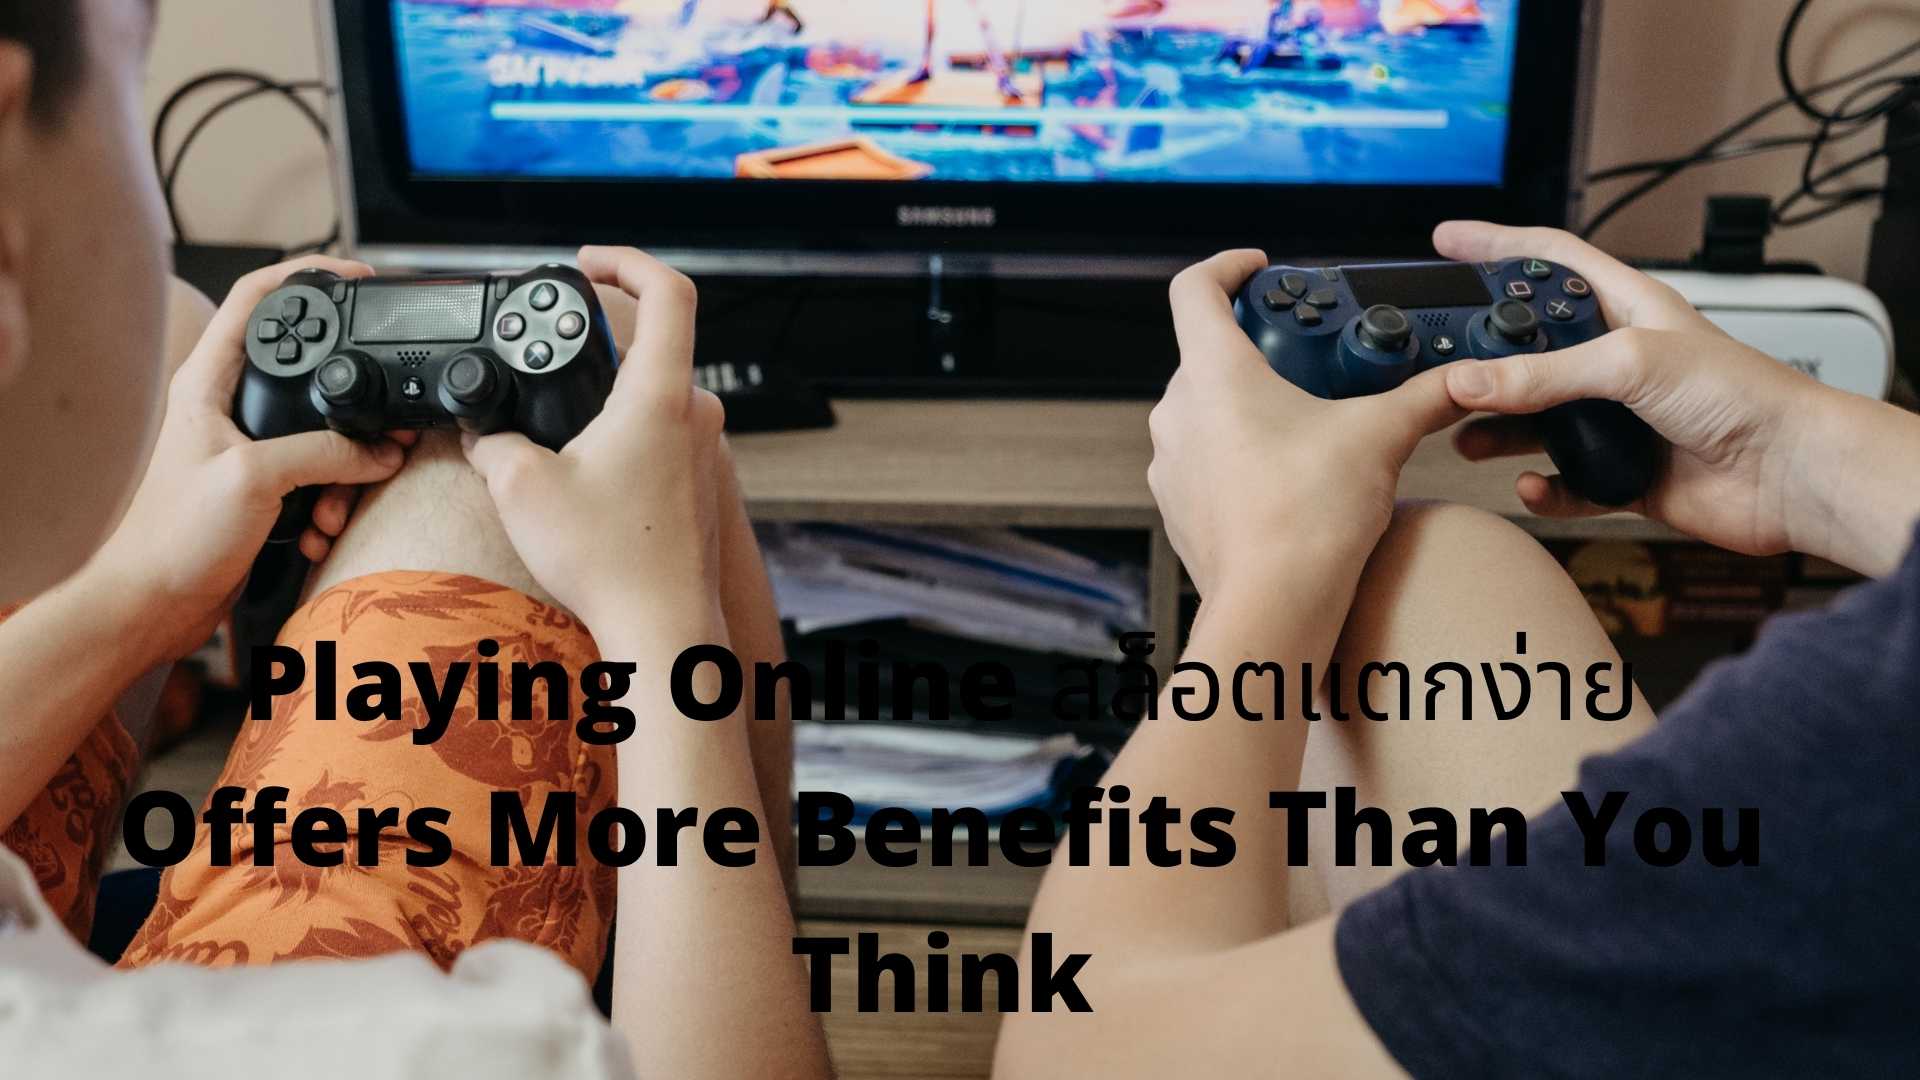 Playing Online สล็อตแตกง่าย Offers More Benefits Than You Think